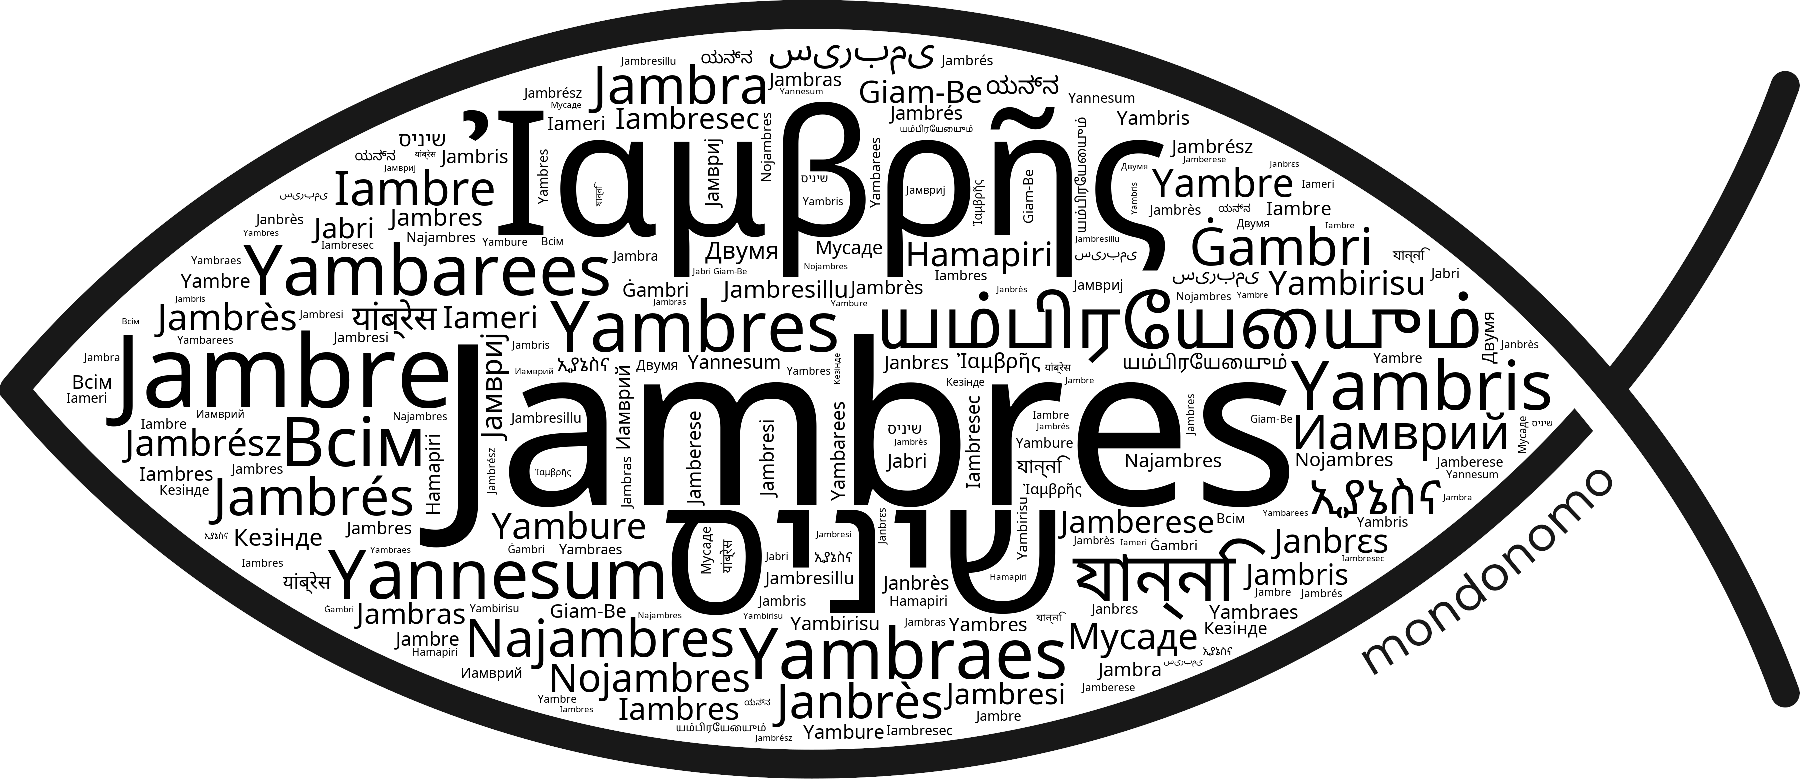 Name Jambres in the world's Bibles